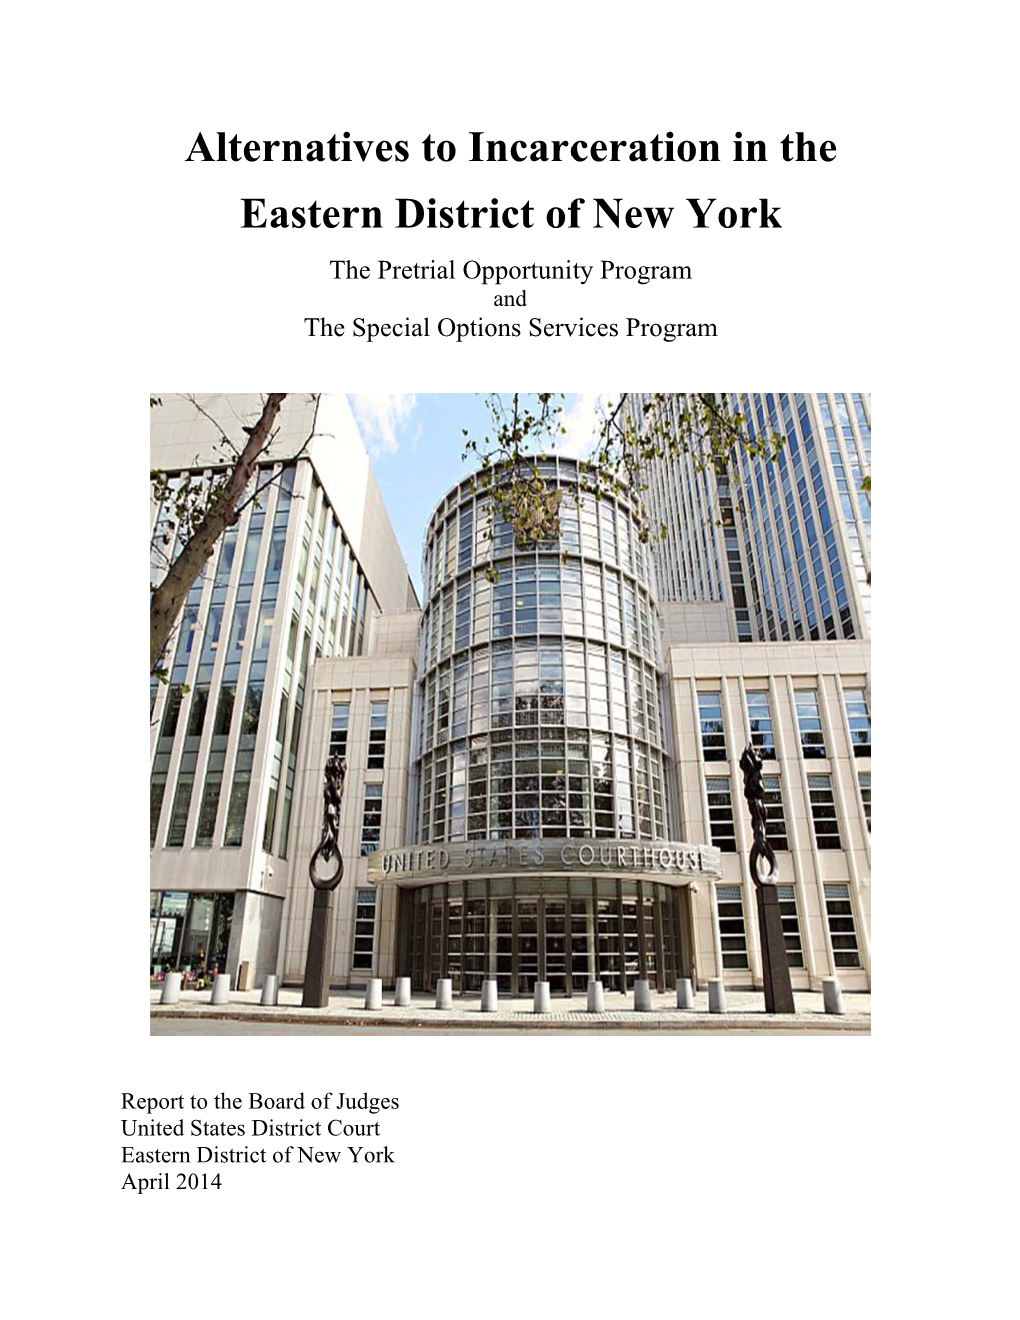 Alternatives to Incarceration in the Eastern District of New York